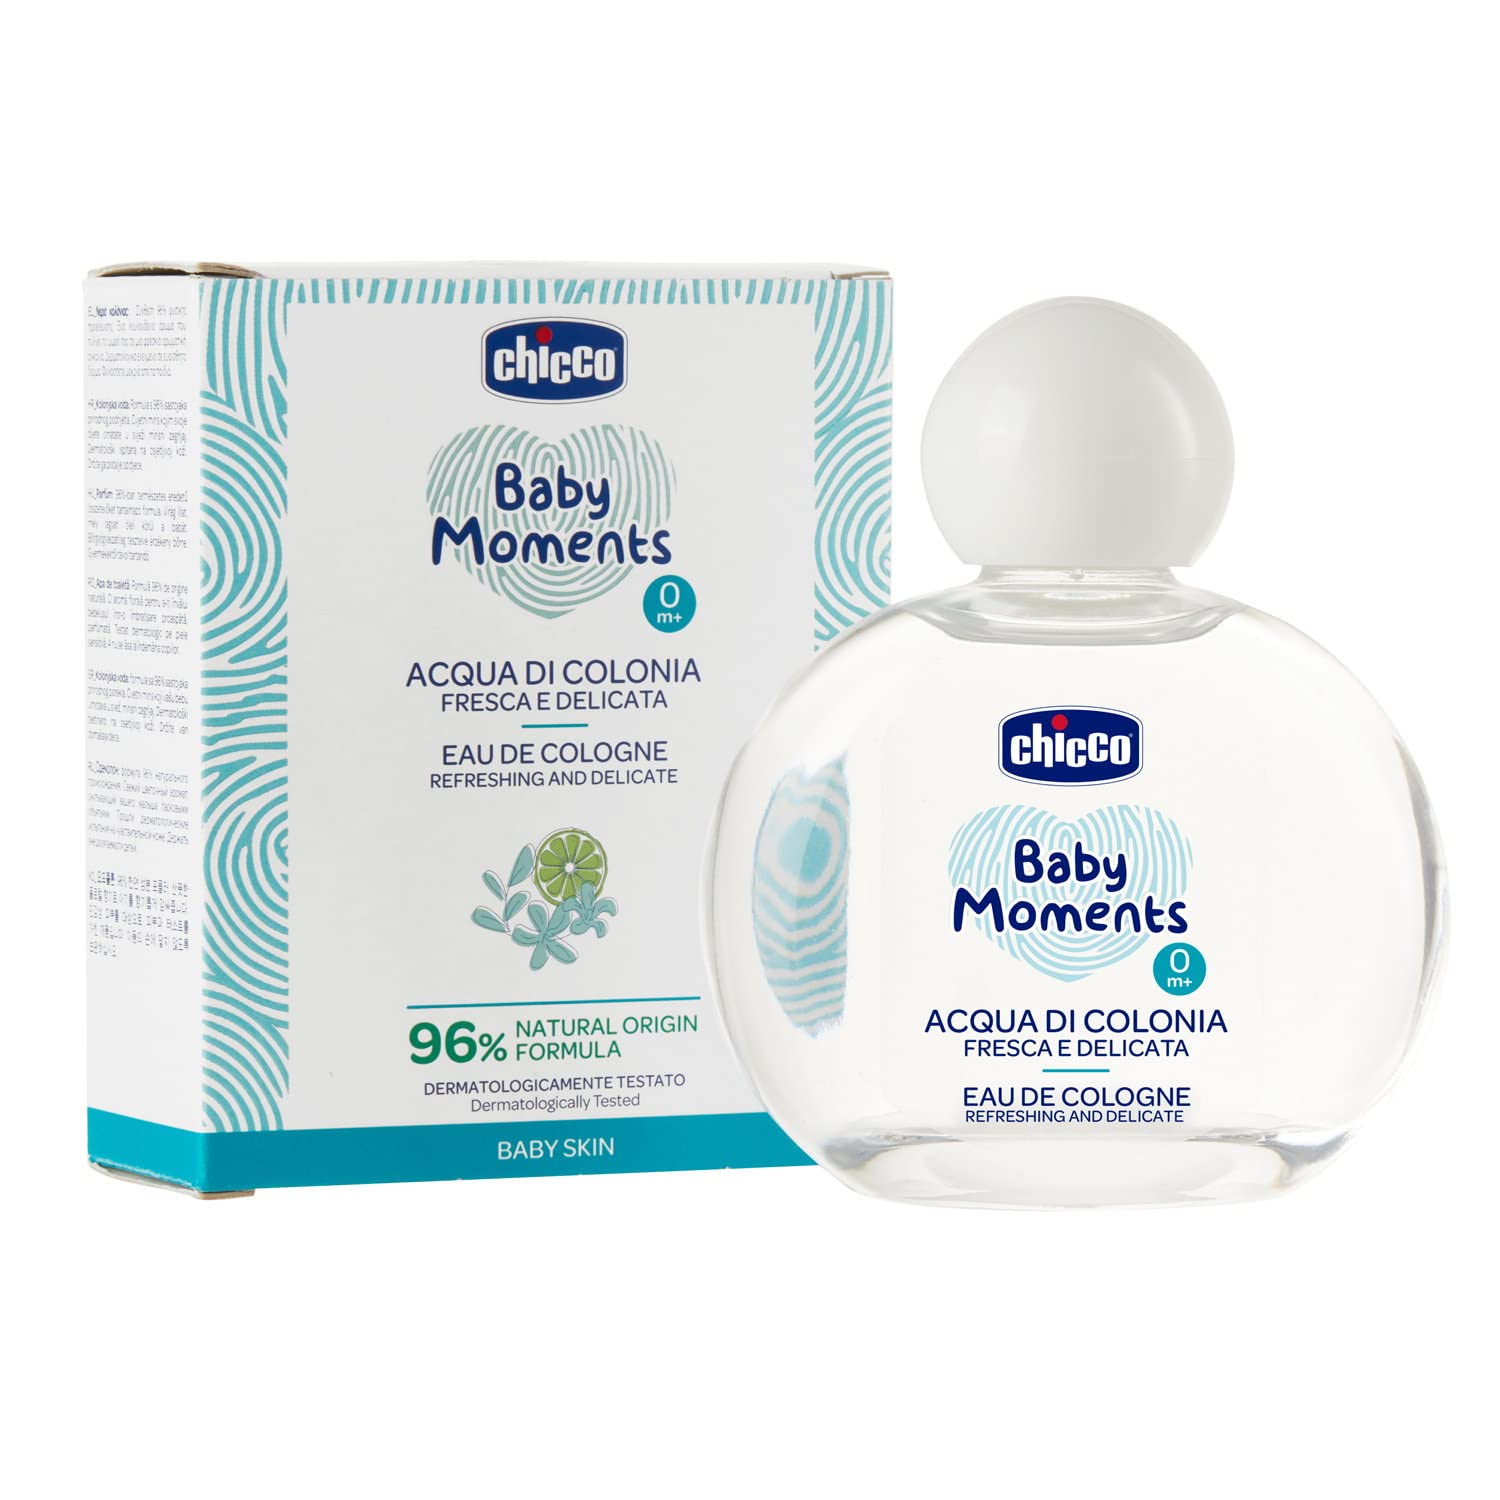 Chicco Baby Moments Eau De Cologne Refreshing And Delicate 100ML – AYOOB  EXHIBITION LLC